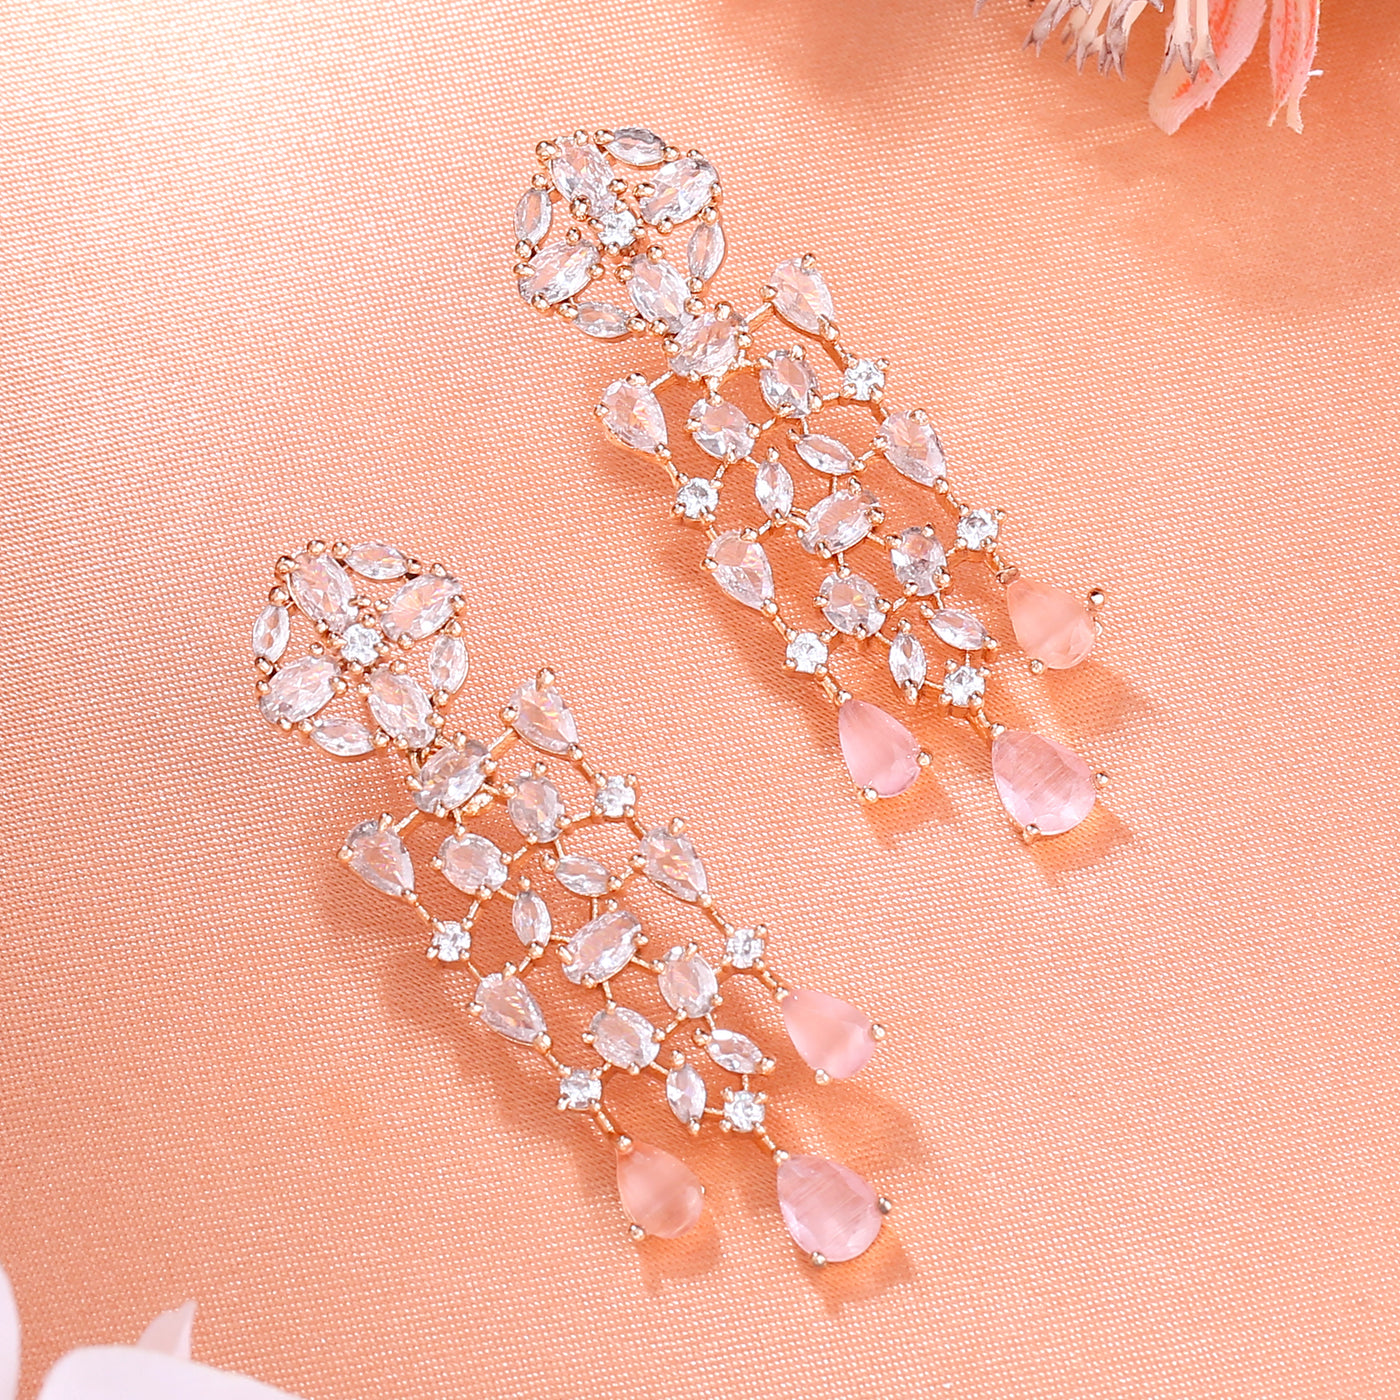 Estele Rose Gold Plated CZ Shimmery Trickle Designer Earrings with Mint Pink Stones for Women